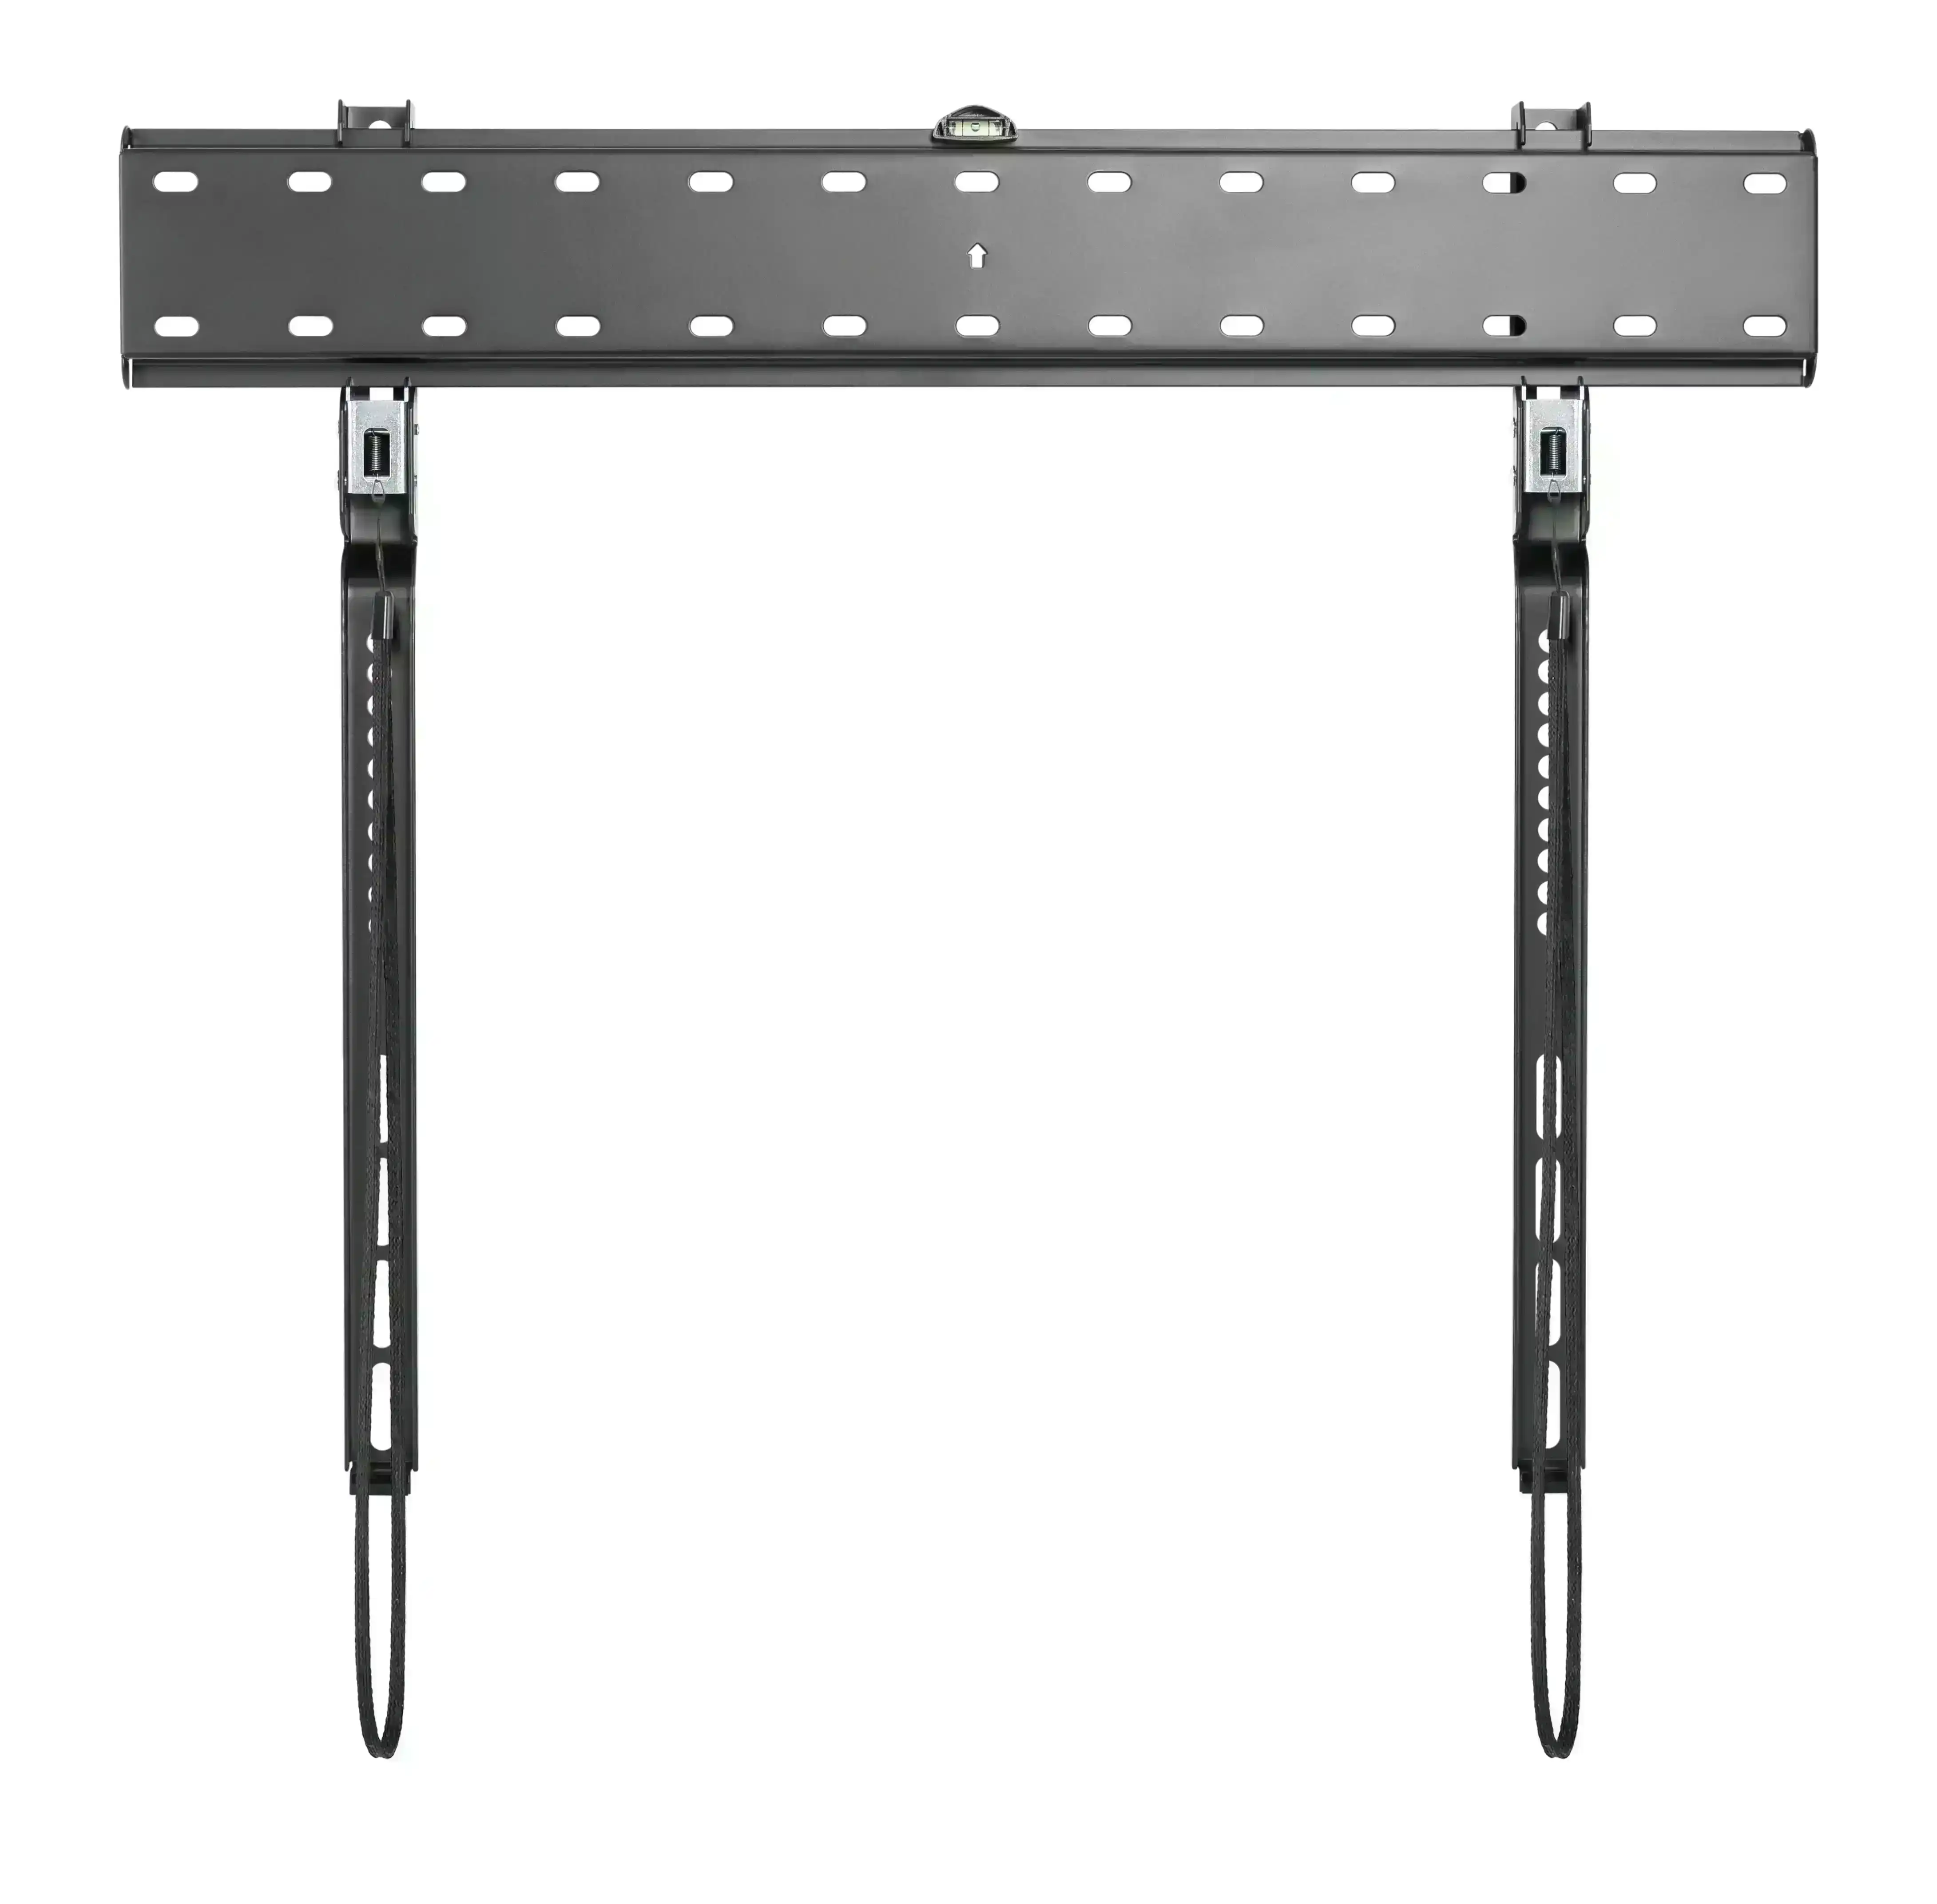 Laser Ultra Slim Fixed Wall Mount for TVs (43-80", 40kg) - Space Saving Secure